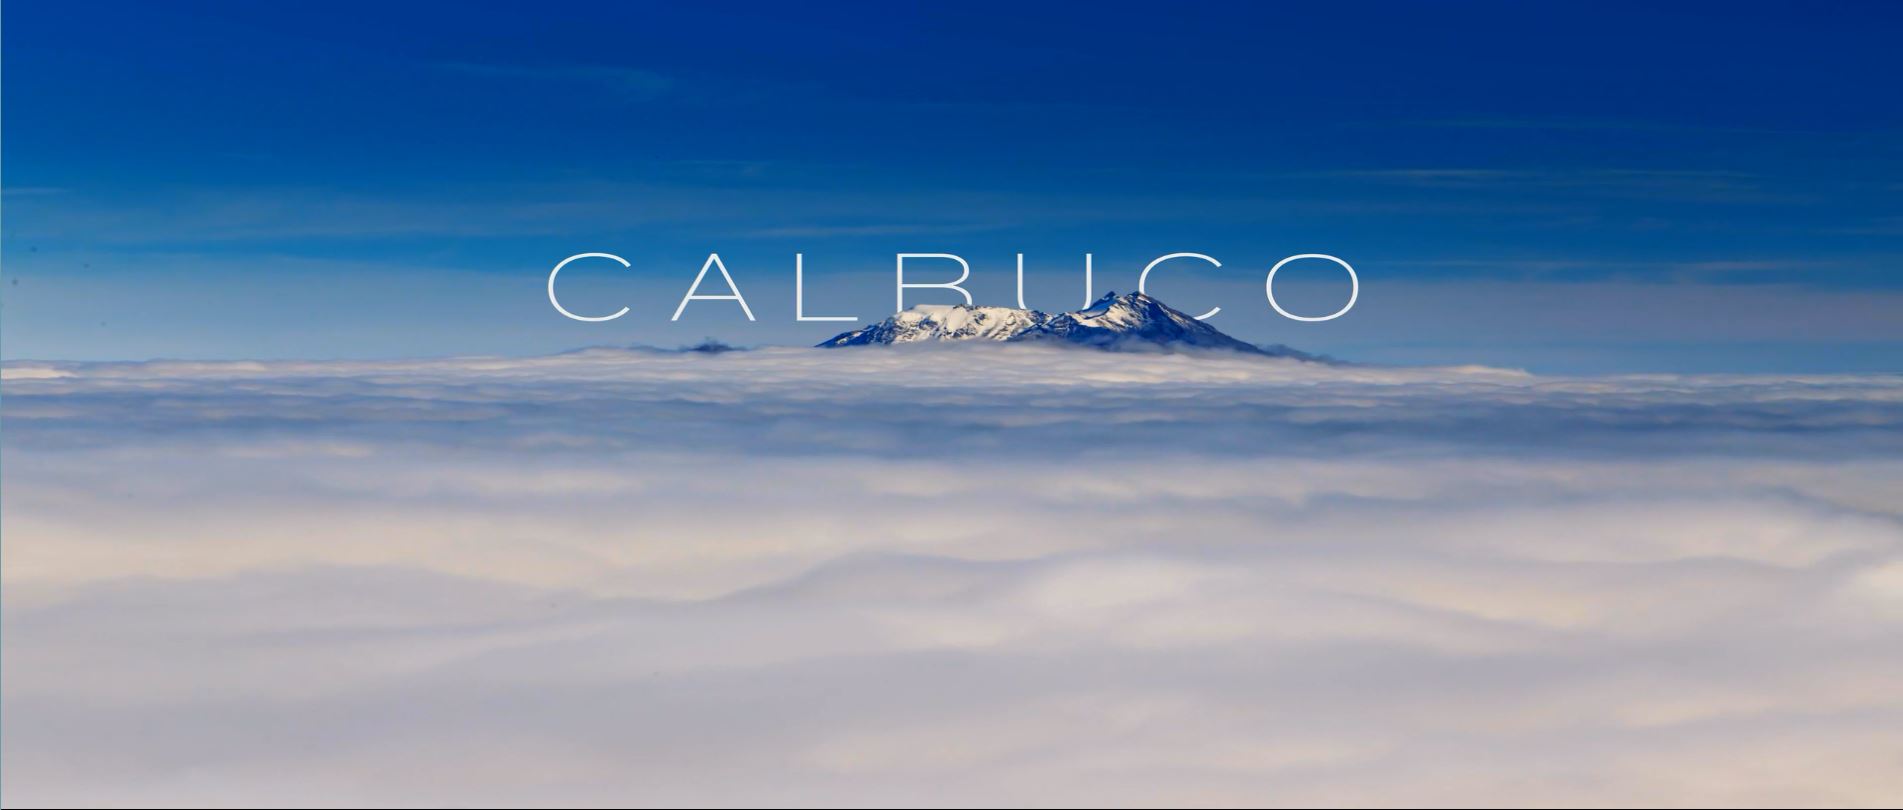 Calbuco 1 - Be There Before